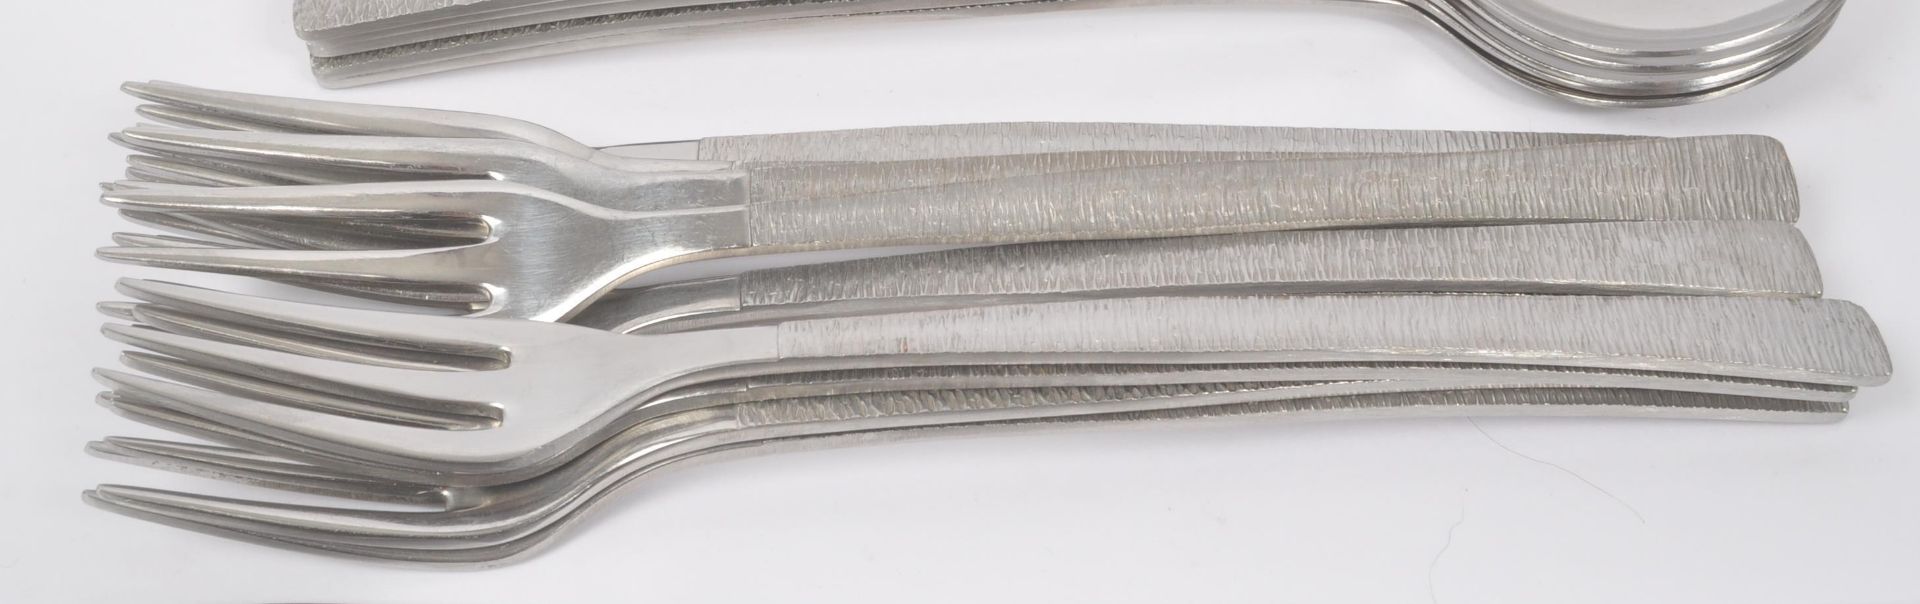 COLLECTION OF VINERS OF SHEFFIELD BARK EFFECT CUTLERY - Image 4 of 6